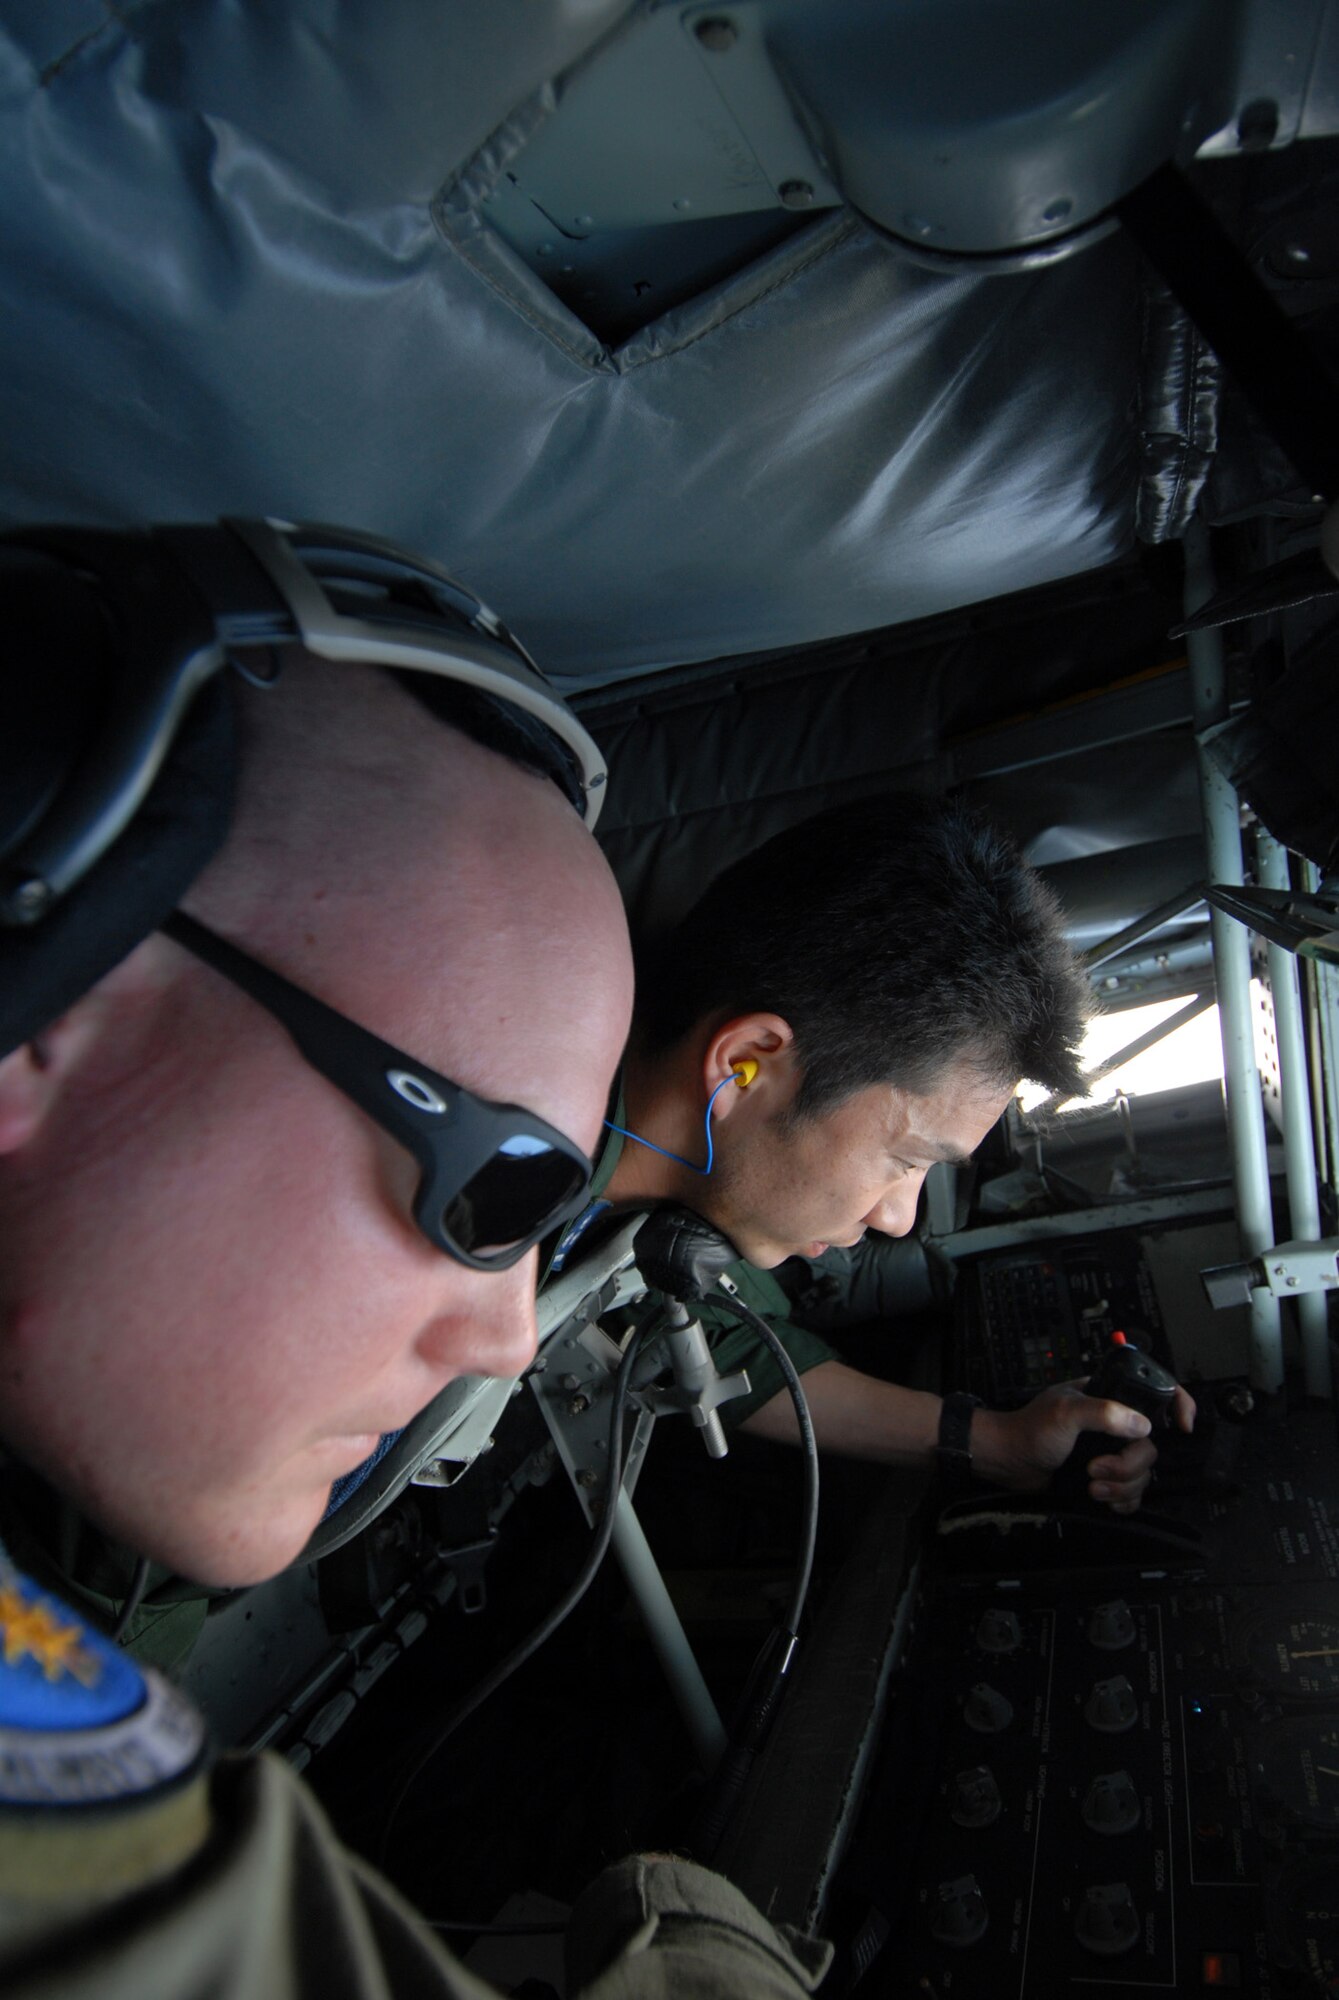 Senior Airman Christopher Pedersen, 909th Air Refueling Squadron, explains to Shinichi Kudoh, Japan Air Self Defense Force, the procedures for operating the boom during refueling training at Kadena Air Base, Japan. The training was conducted to familiarize JASDF members with U.S. Air Force refueling procedures. (U.S.photo/Staff Sergeant Darnell T. Cannady)